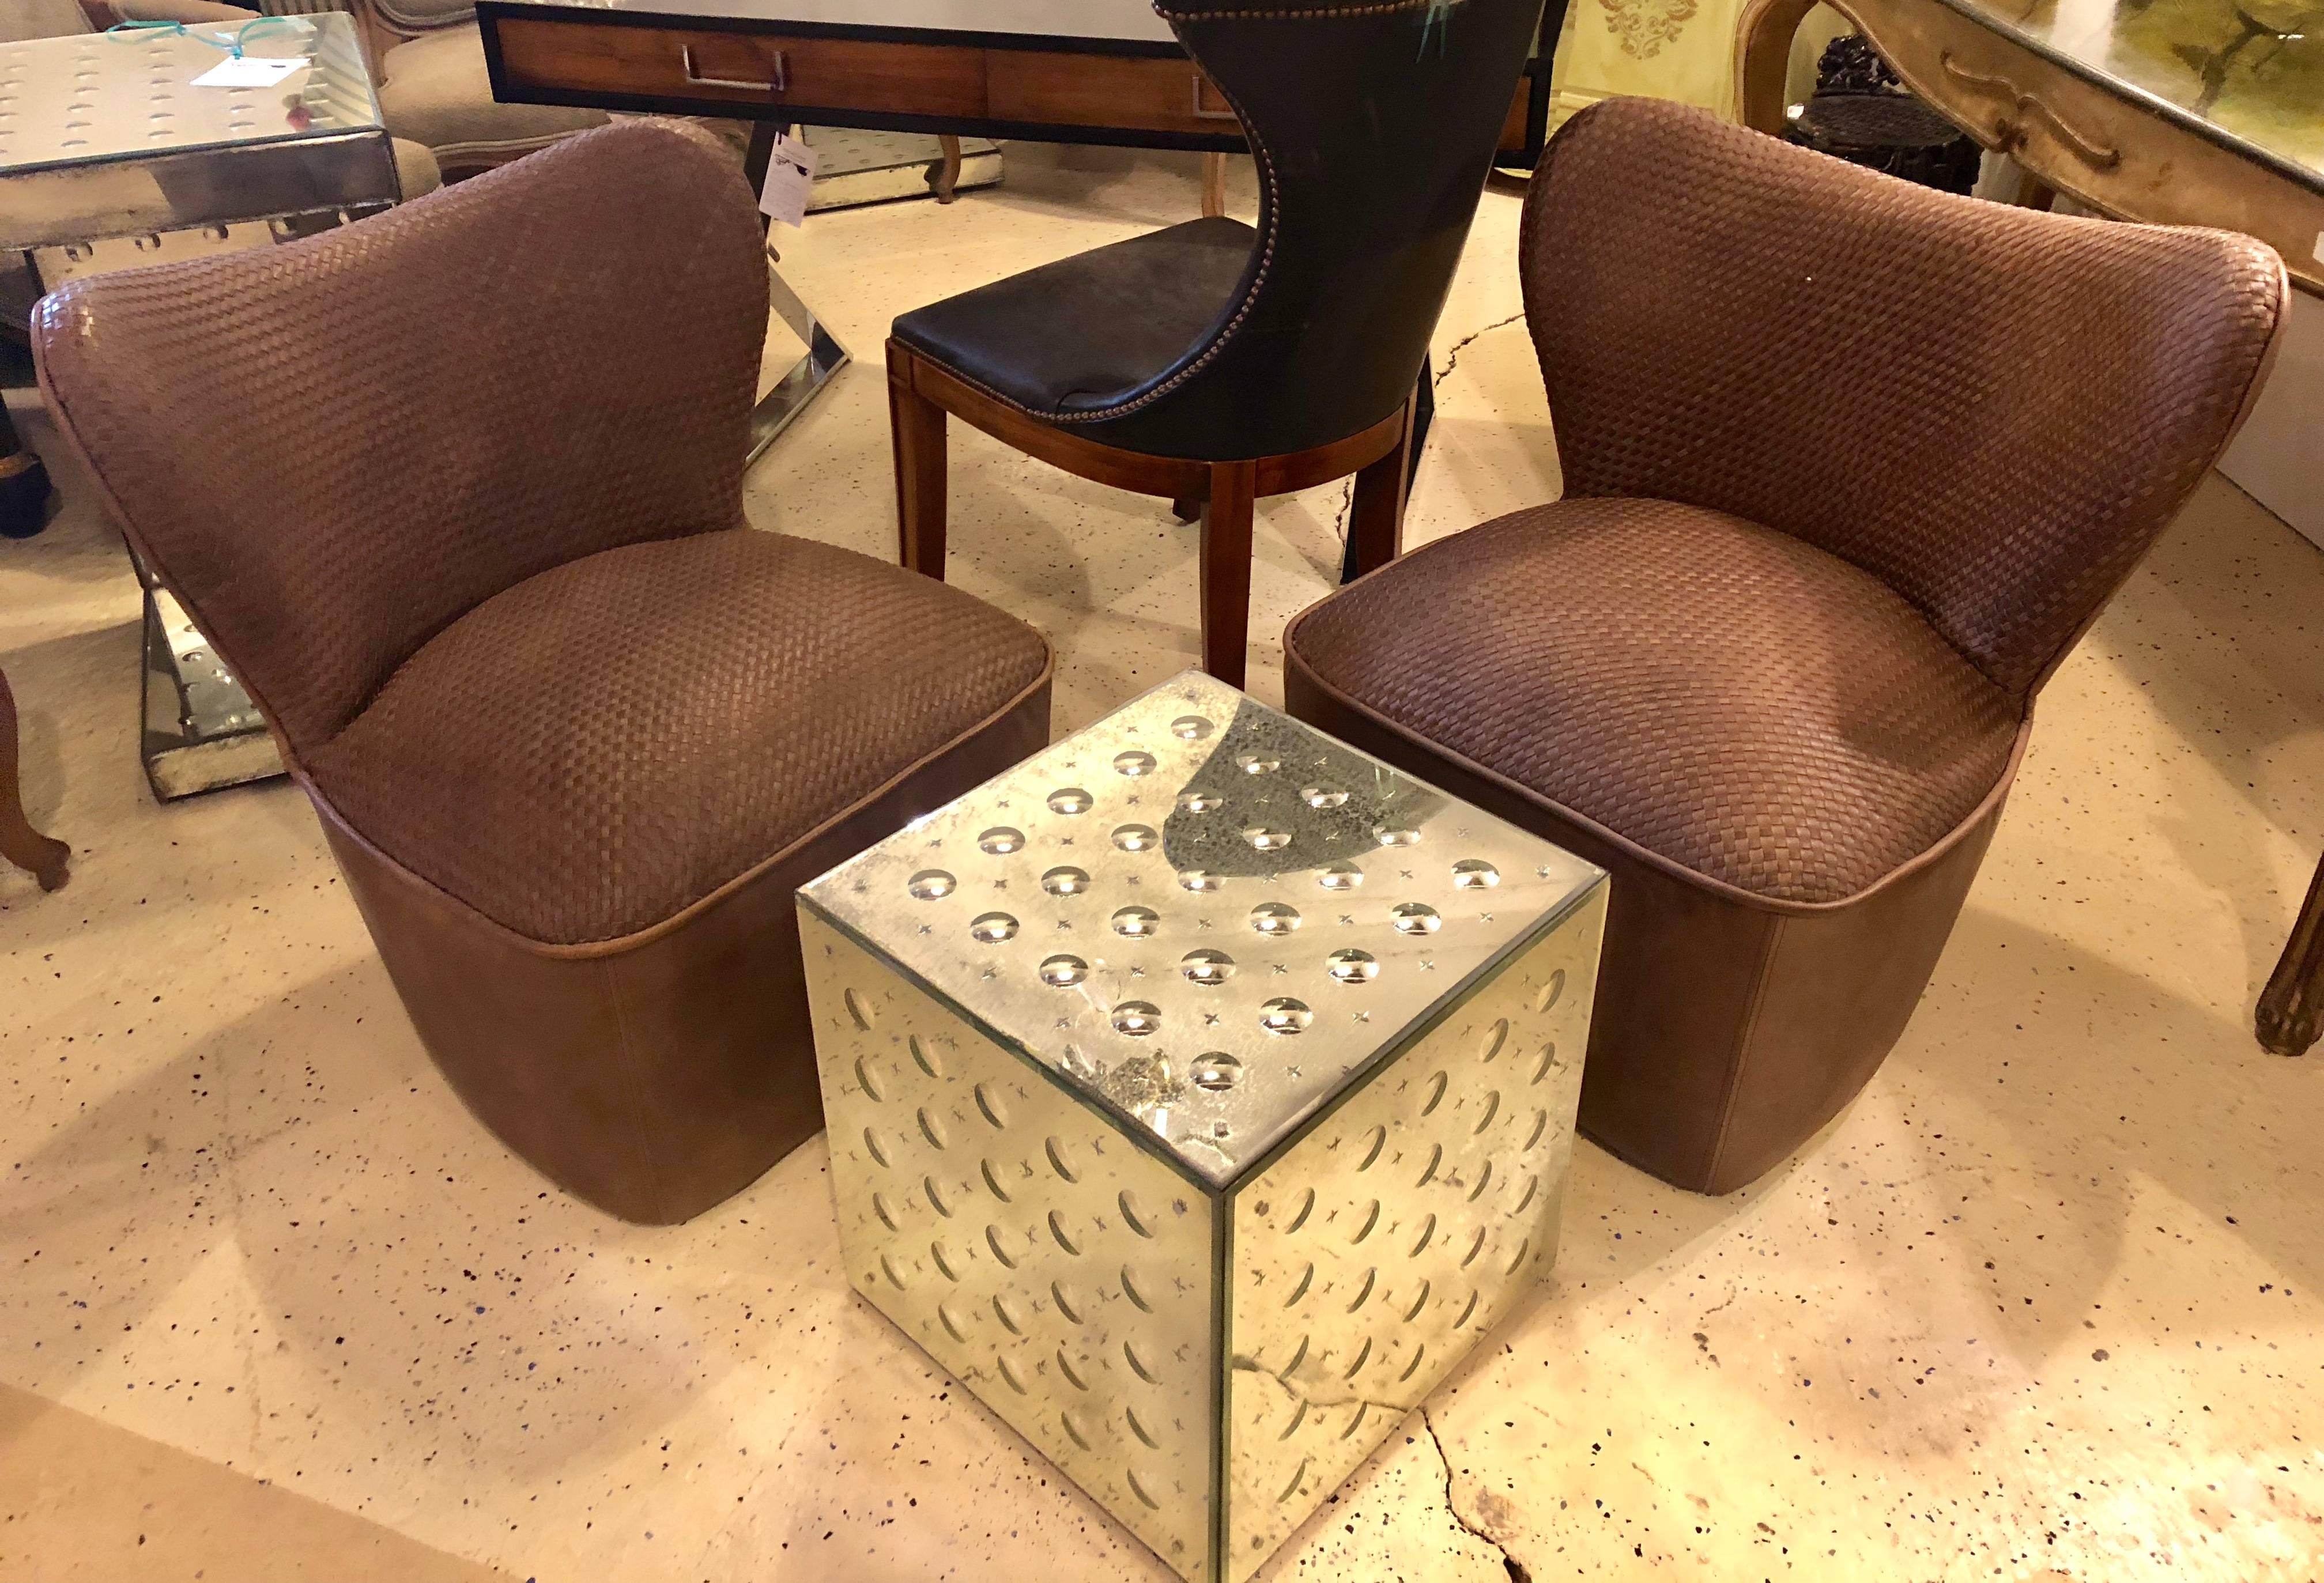 A pair of woven modern leather seat and backrest side chairs in brown leather tweed. The pair are quite comfortable. Very fashionable and desirable. I have two pair of these one in this color and in a grayish color.